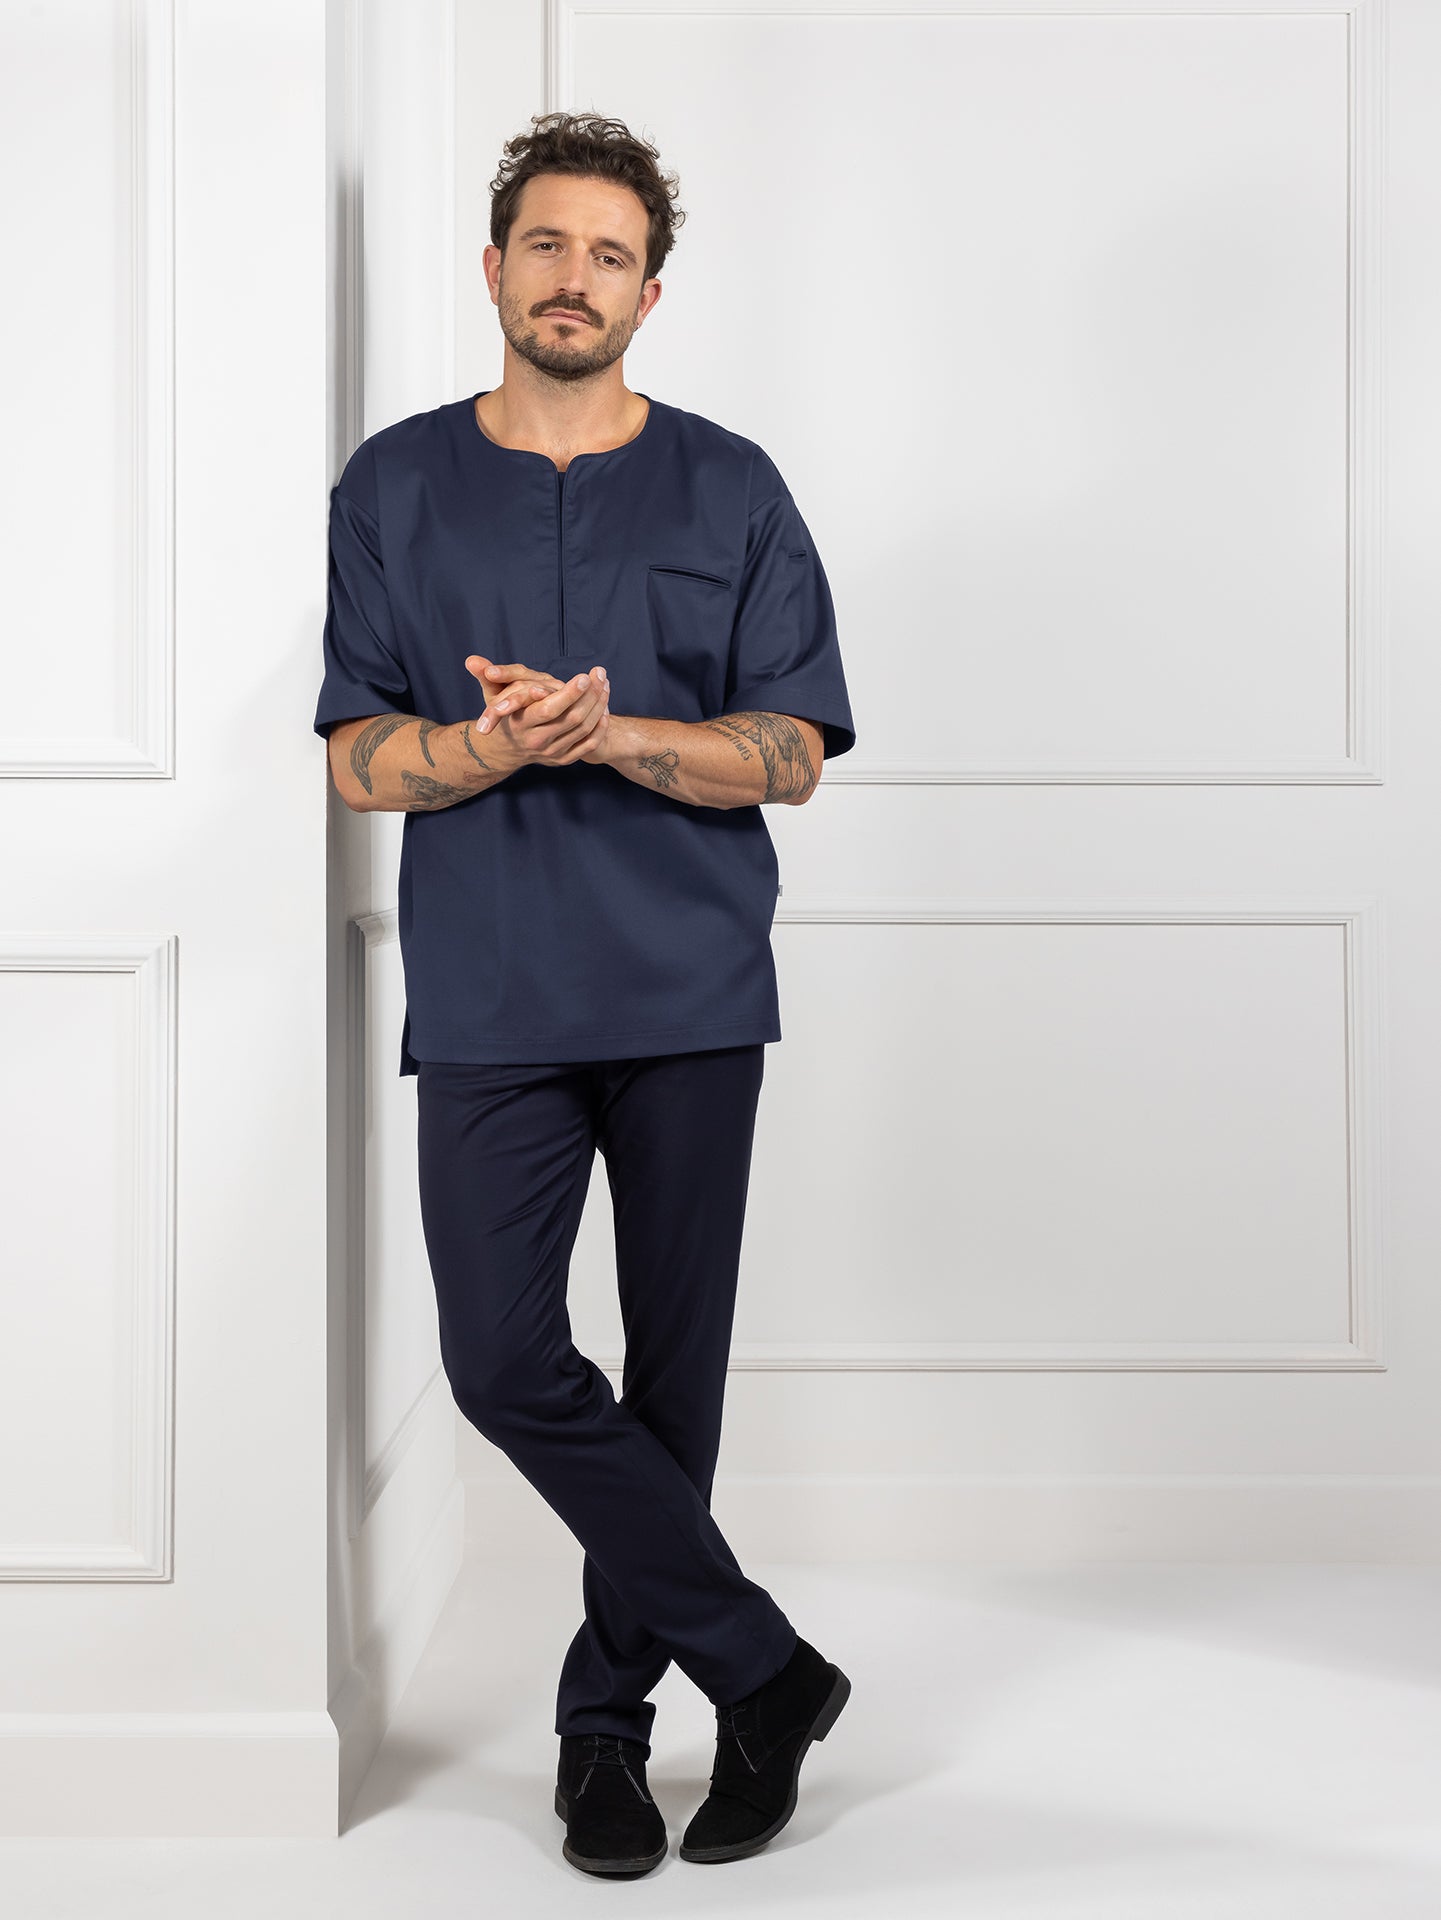 Oversized T-shirt Norian Deep Blue by Le Nouveau Chef for chef and service.